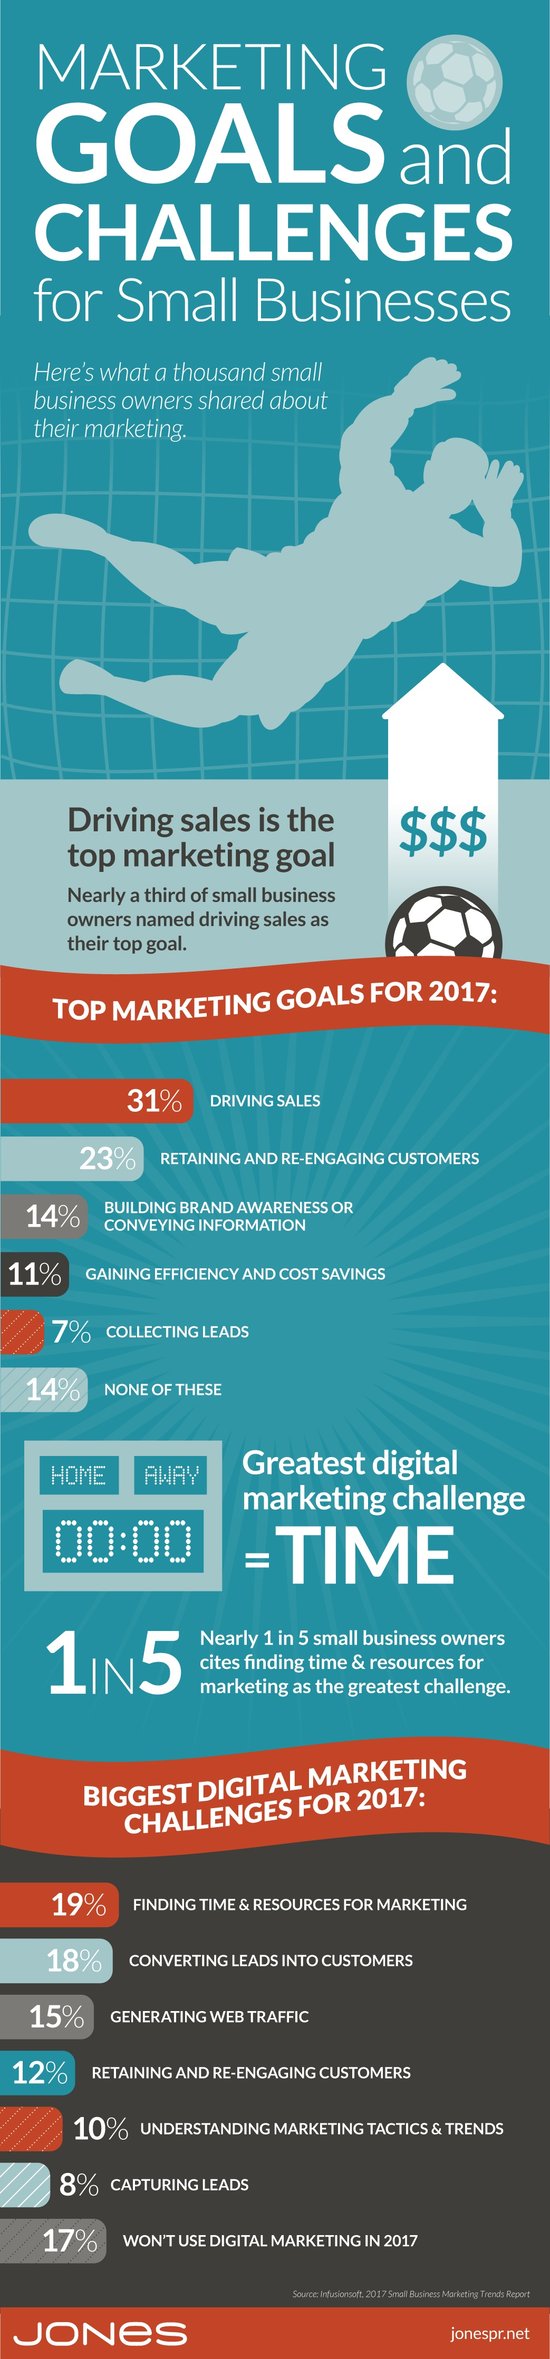 marketing infographic small business marketing trends